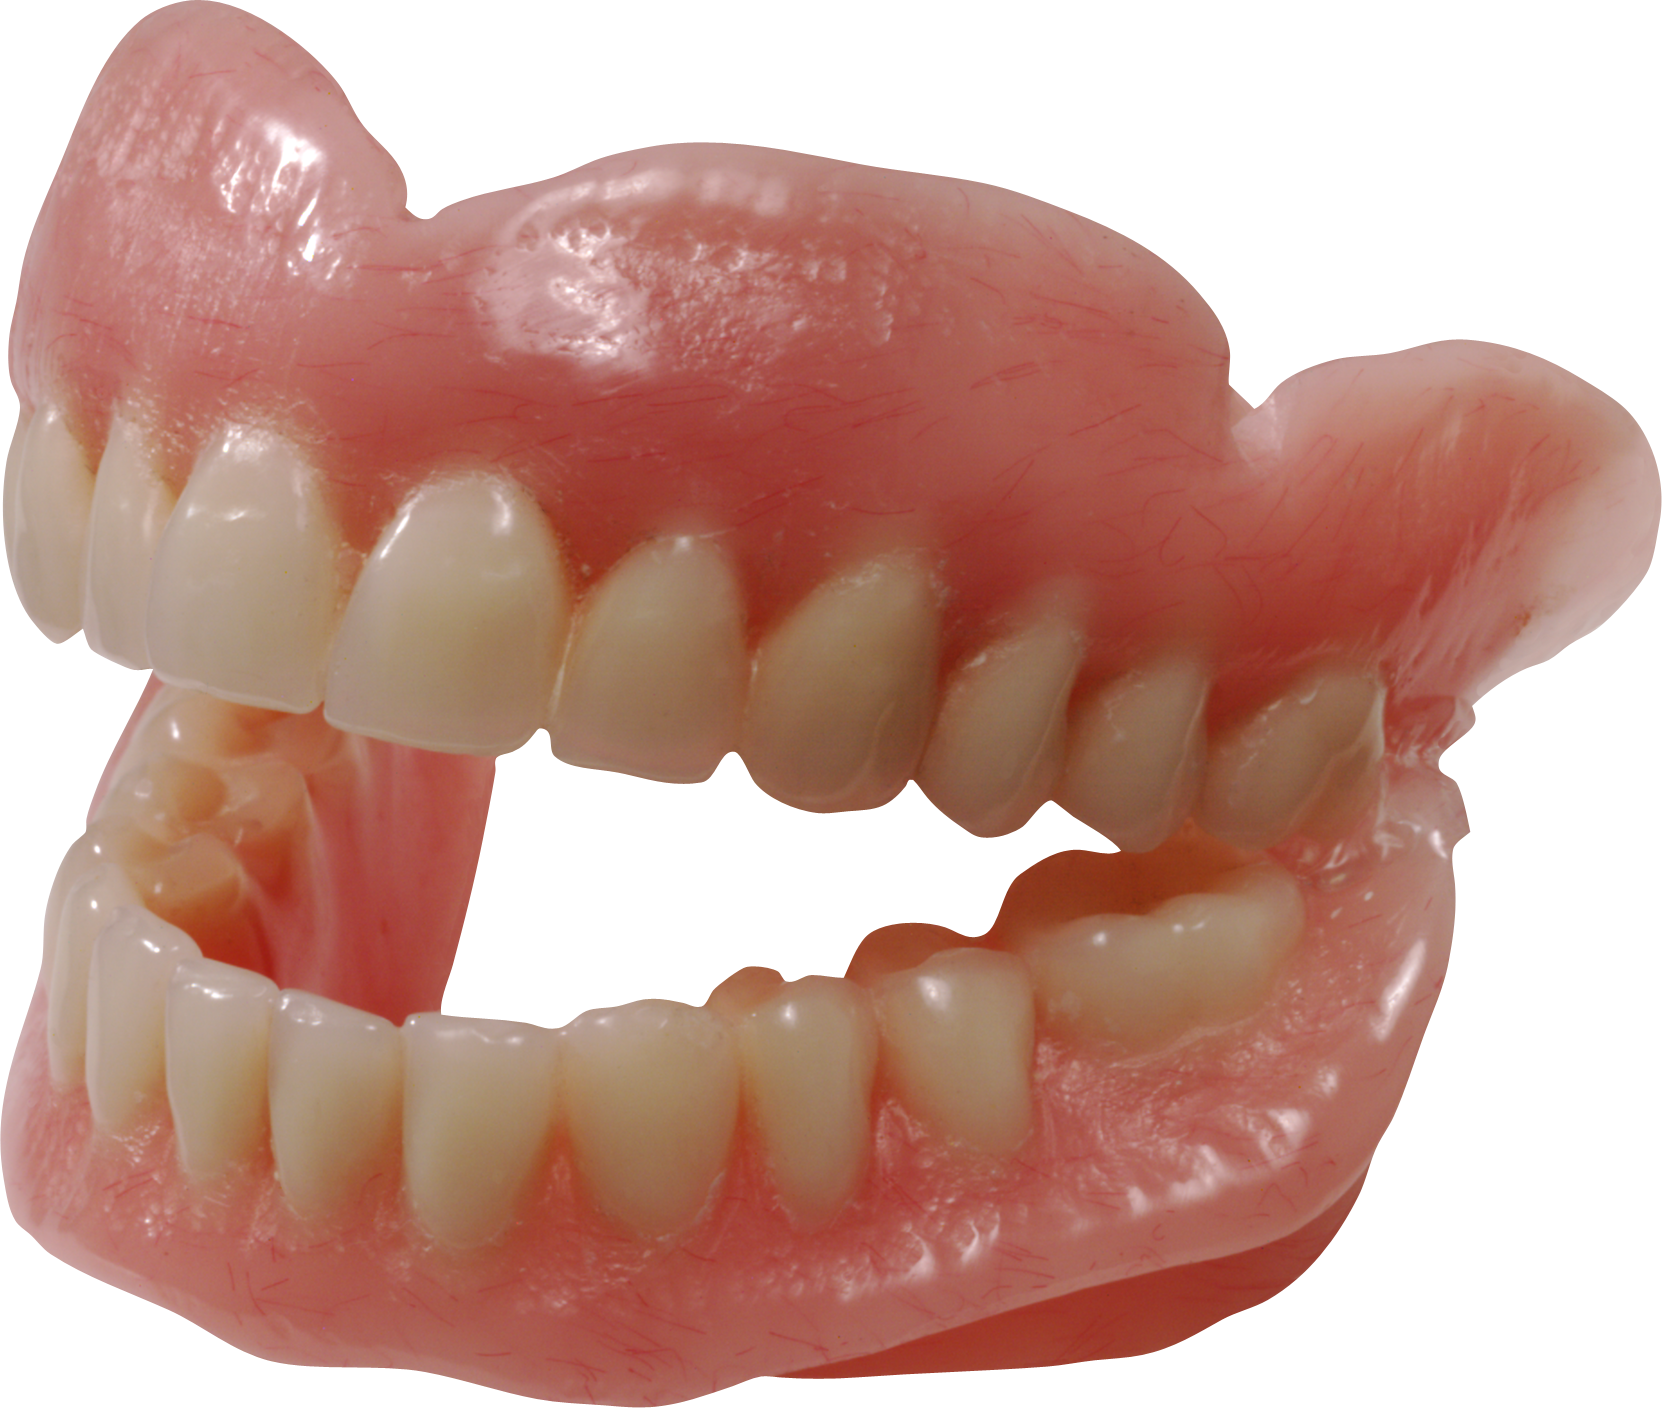 Teeth Png Image - Teeth, Transparent background PNG HD thumbnail